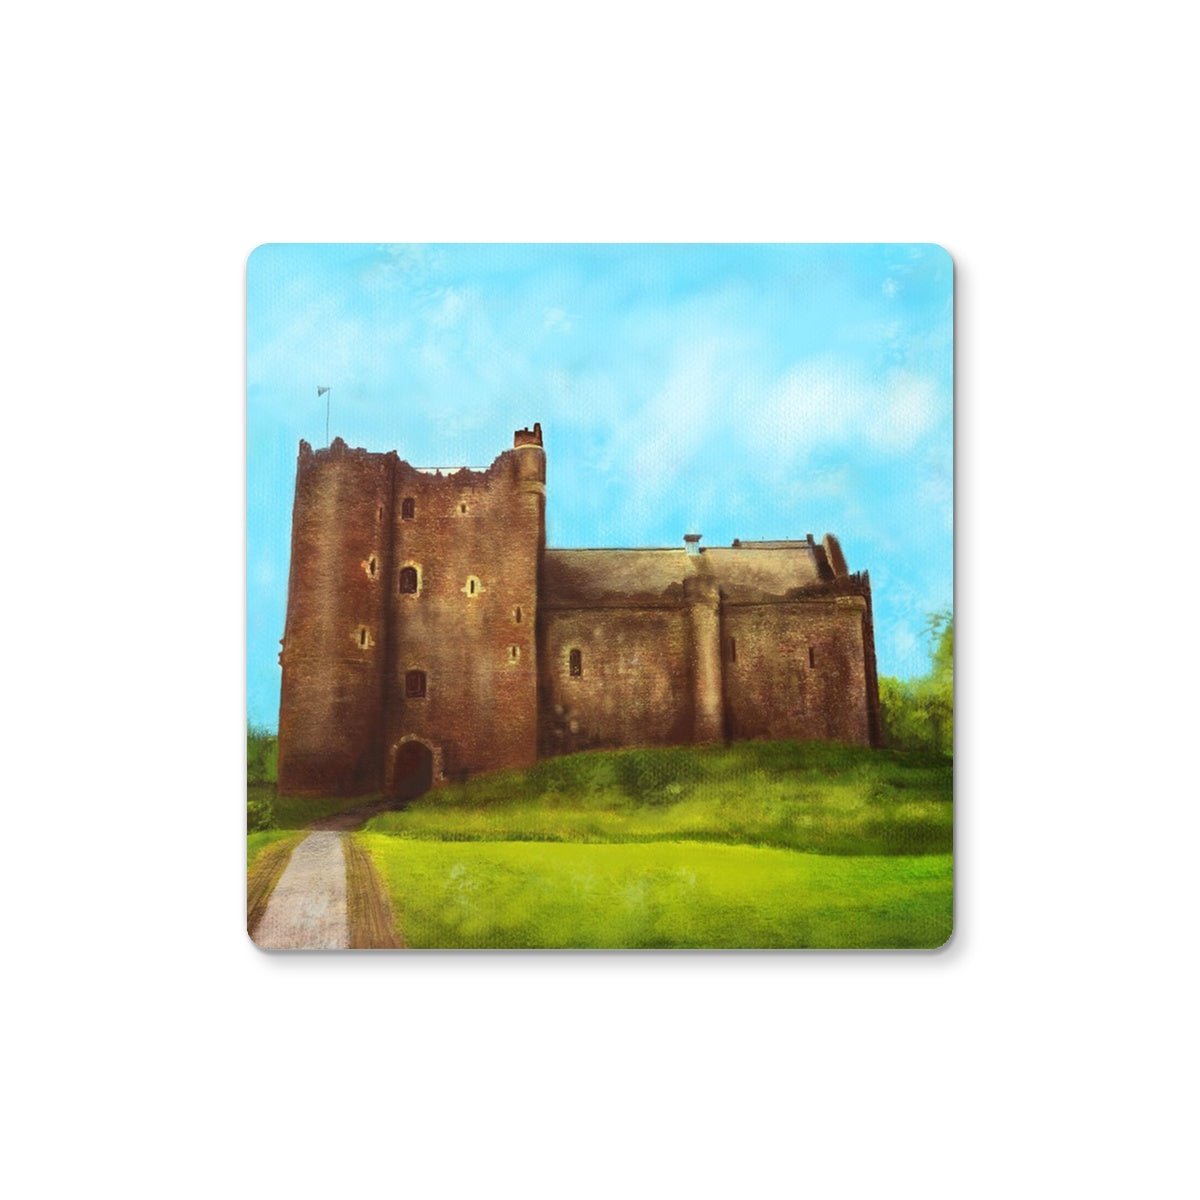 Doune Castle Art Gifts Coaster-Coasters-Scottish Castles Art Gallery-6 Coasters-Paintings, Prints, Homeware, Art Gifts From Scotland By Scottish Artist Kevin Hunter